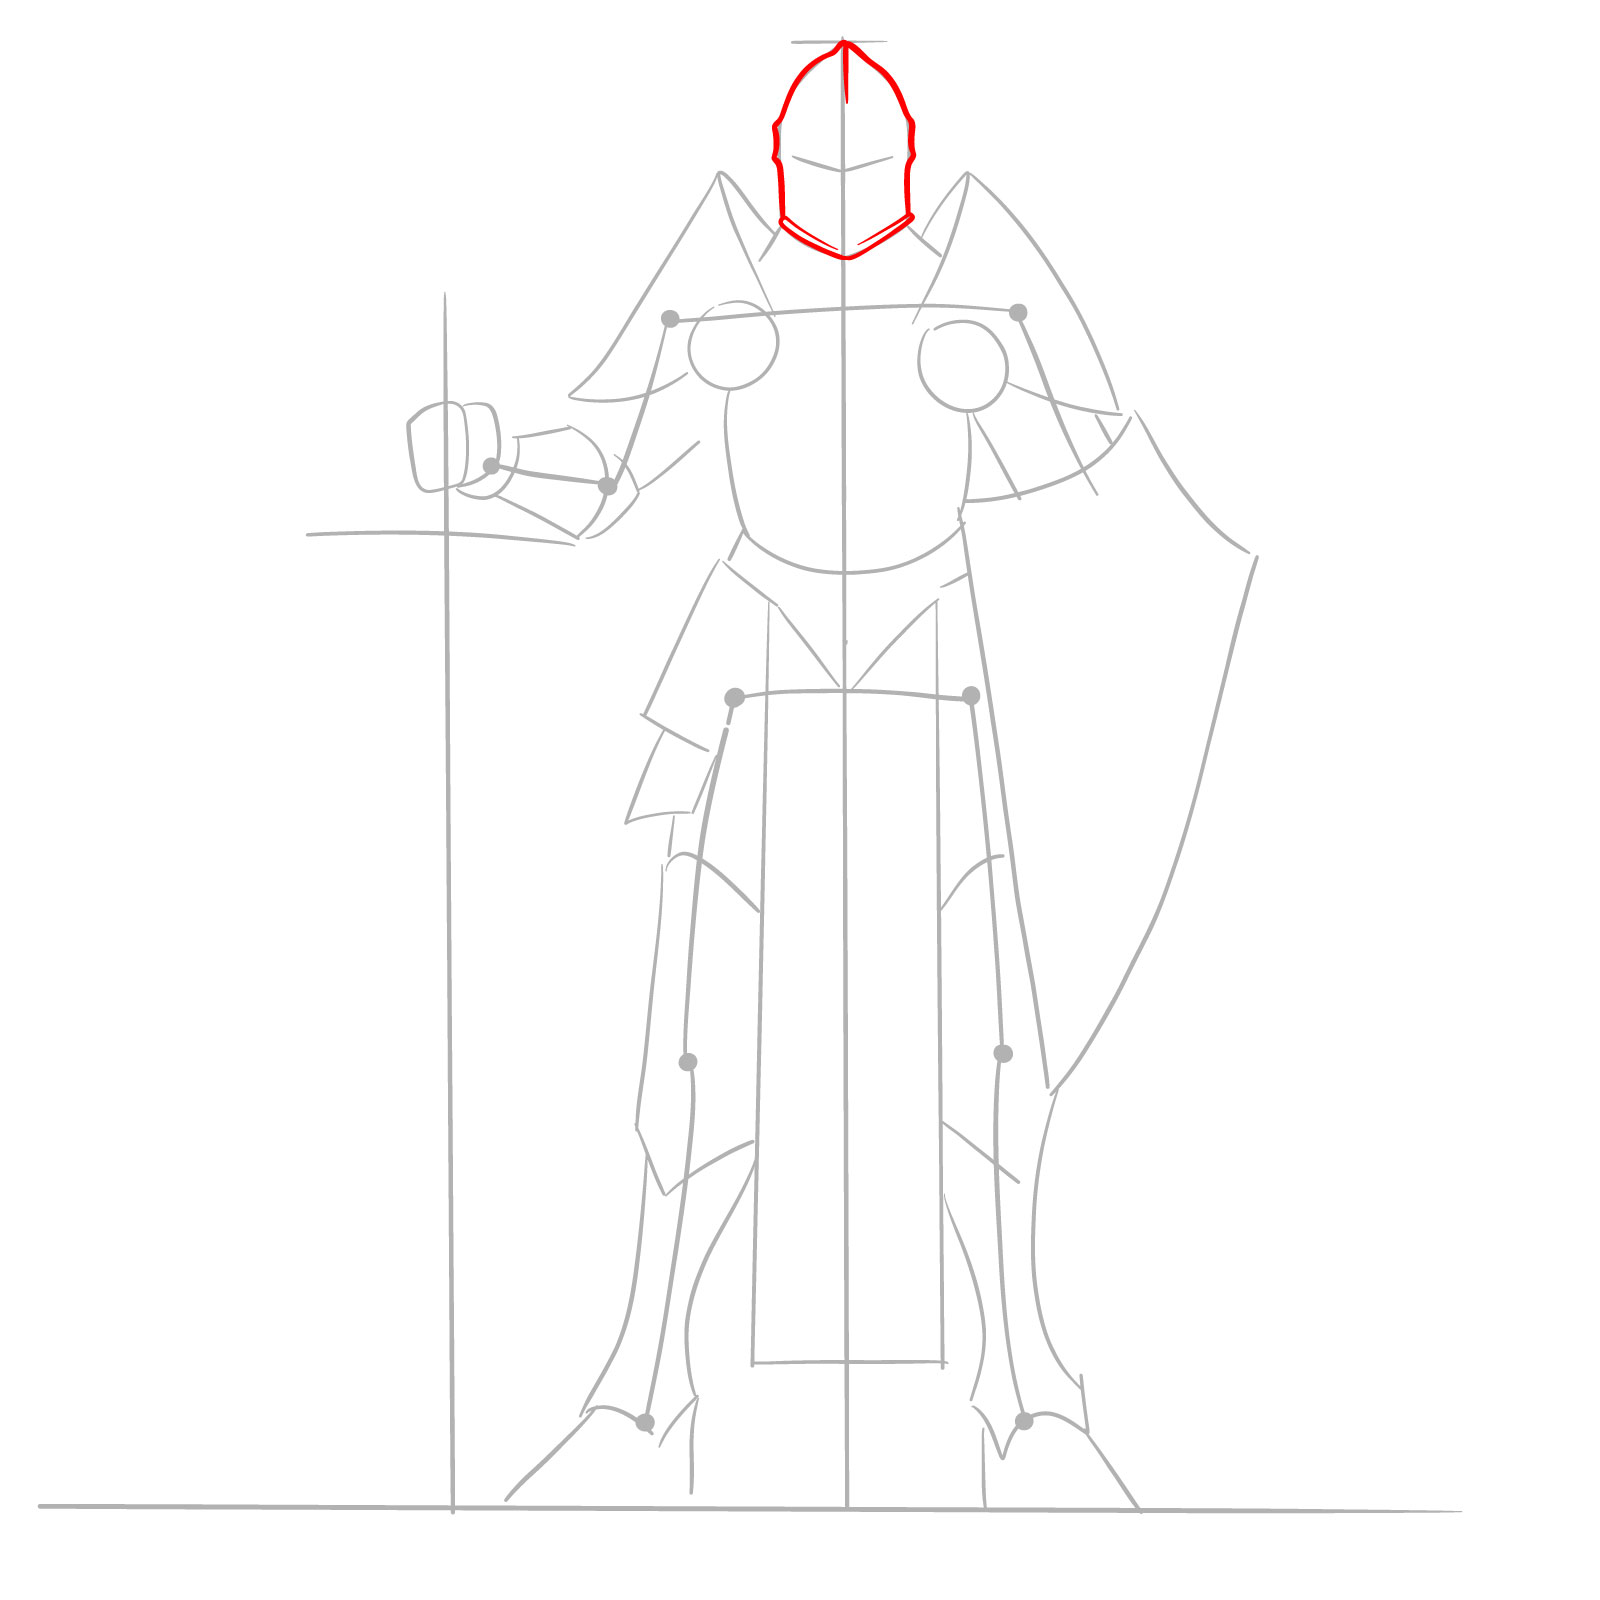 Realistic male paladin drawing step 4: refining helmet details